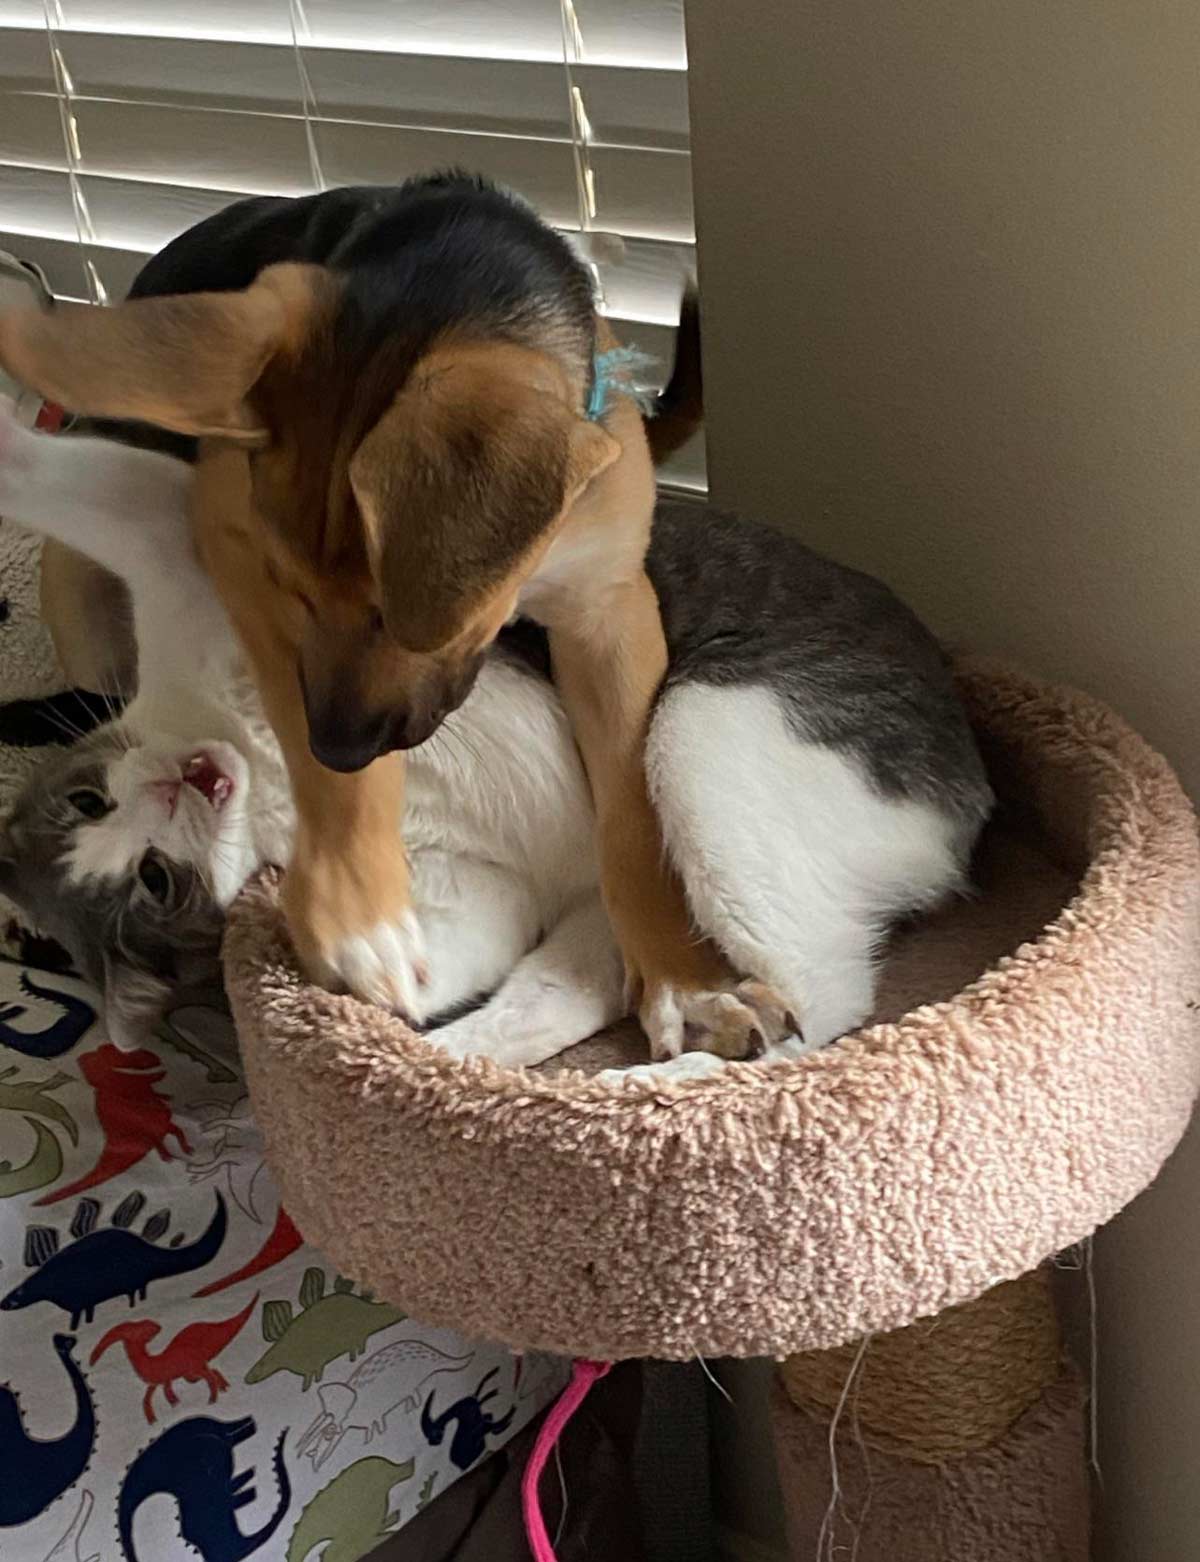 My sister got a new pup, he seems to be getting along with her cat